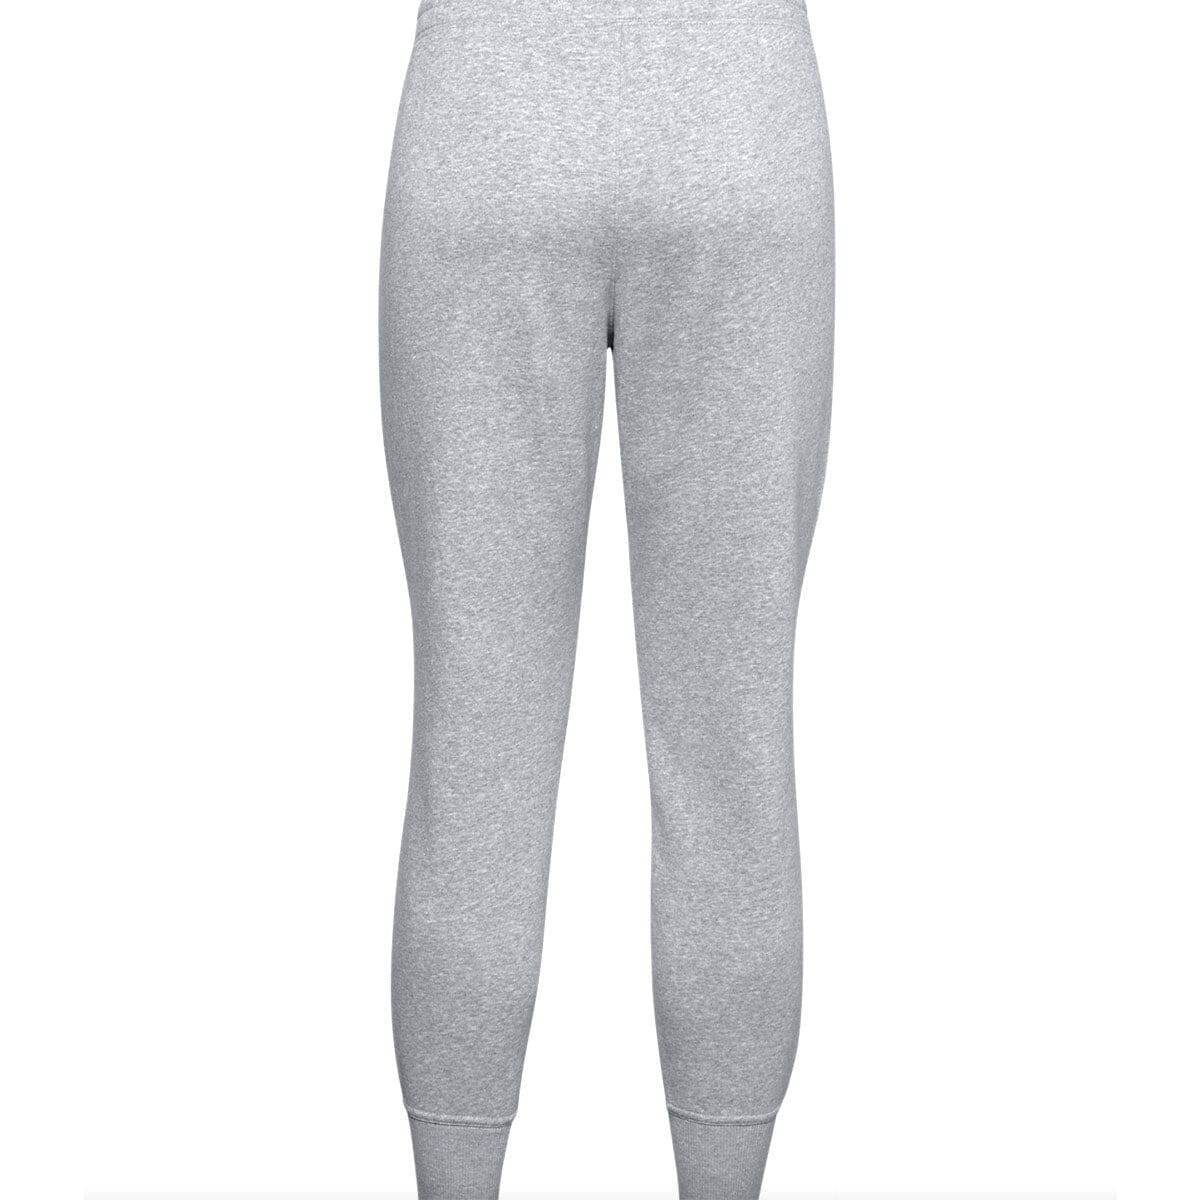 Under Armour Women's Rival Fleece Joggers for just $17 (Reg. $45)!